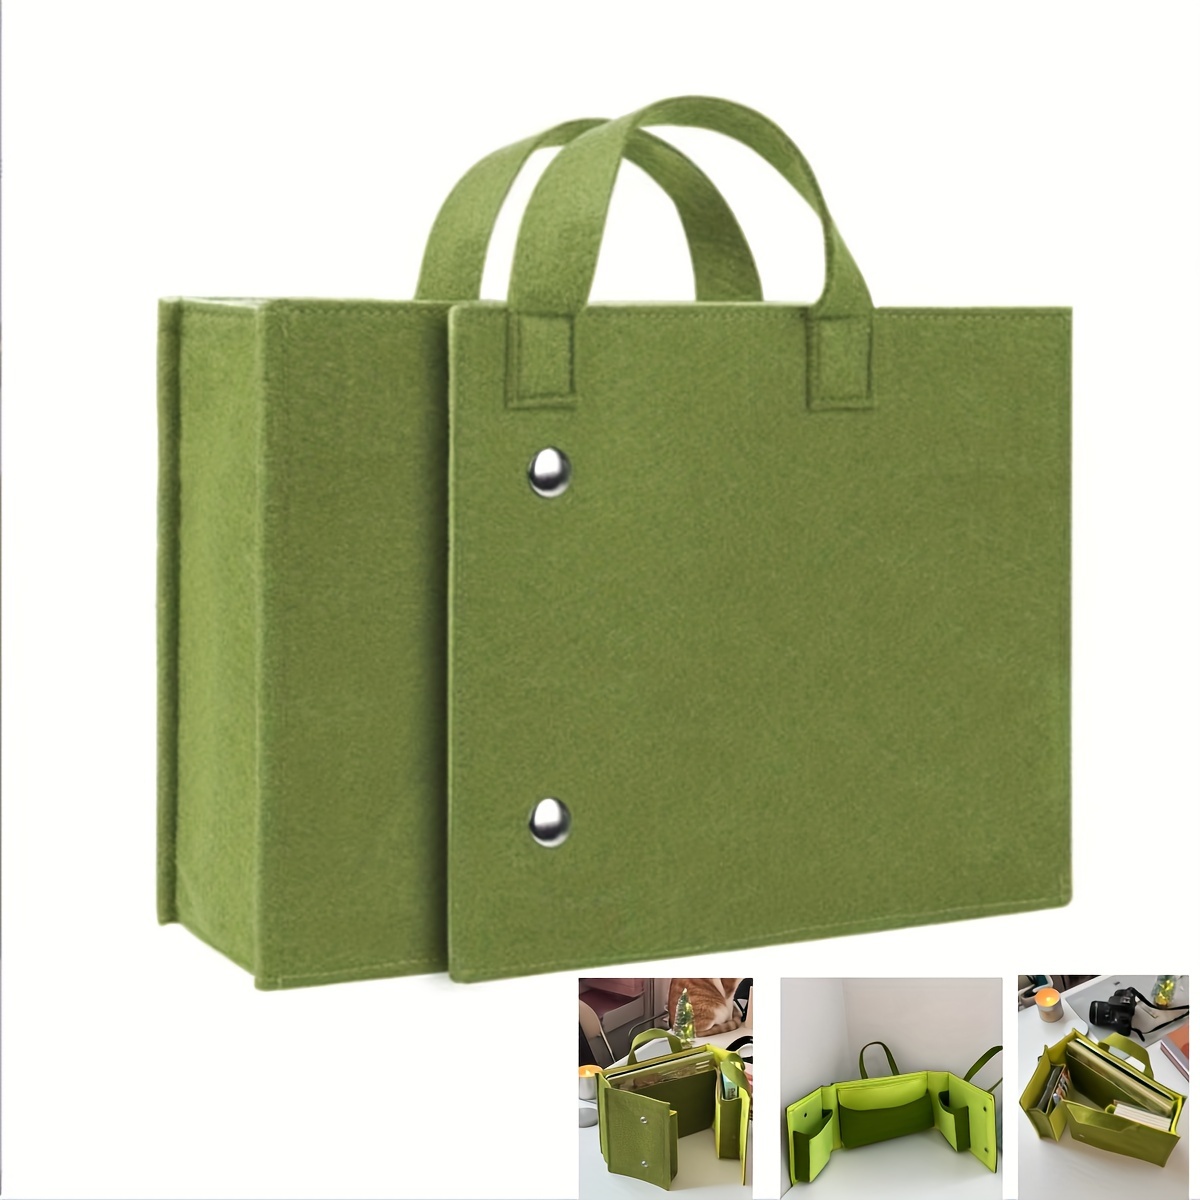 

Large Foldable Felt Storage Bag - Portable & Durable Document Organizer, Thickened Gift Tote With Multiple Colors Available